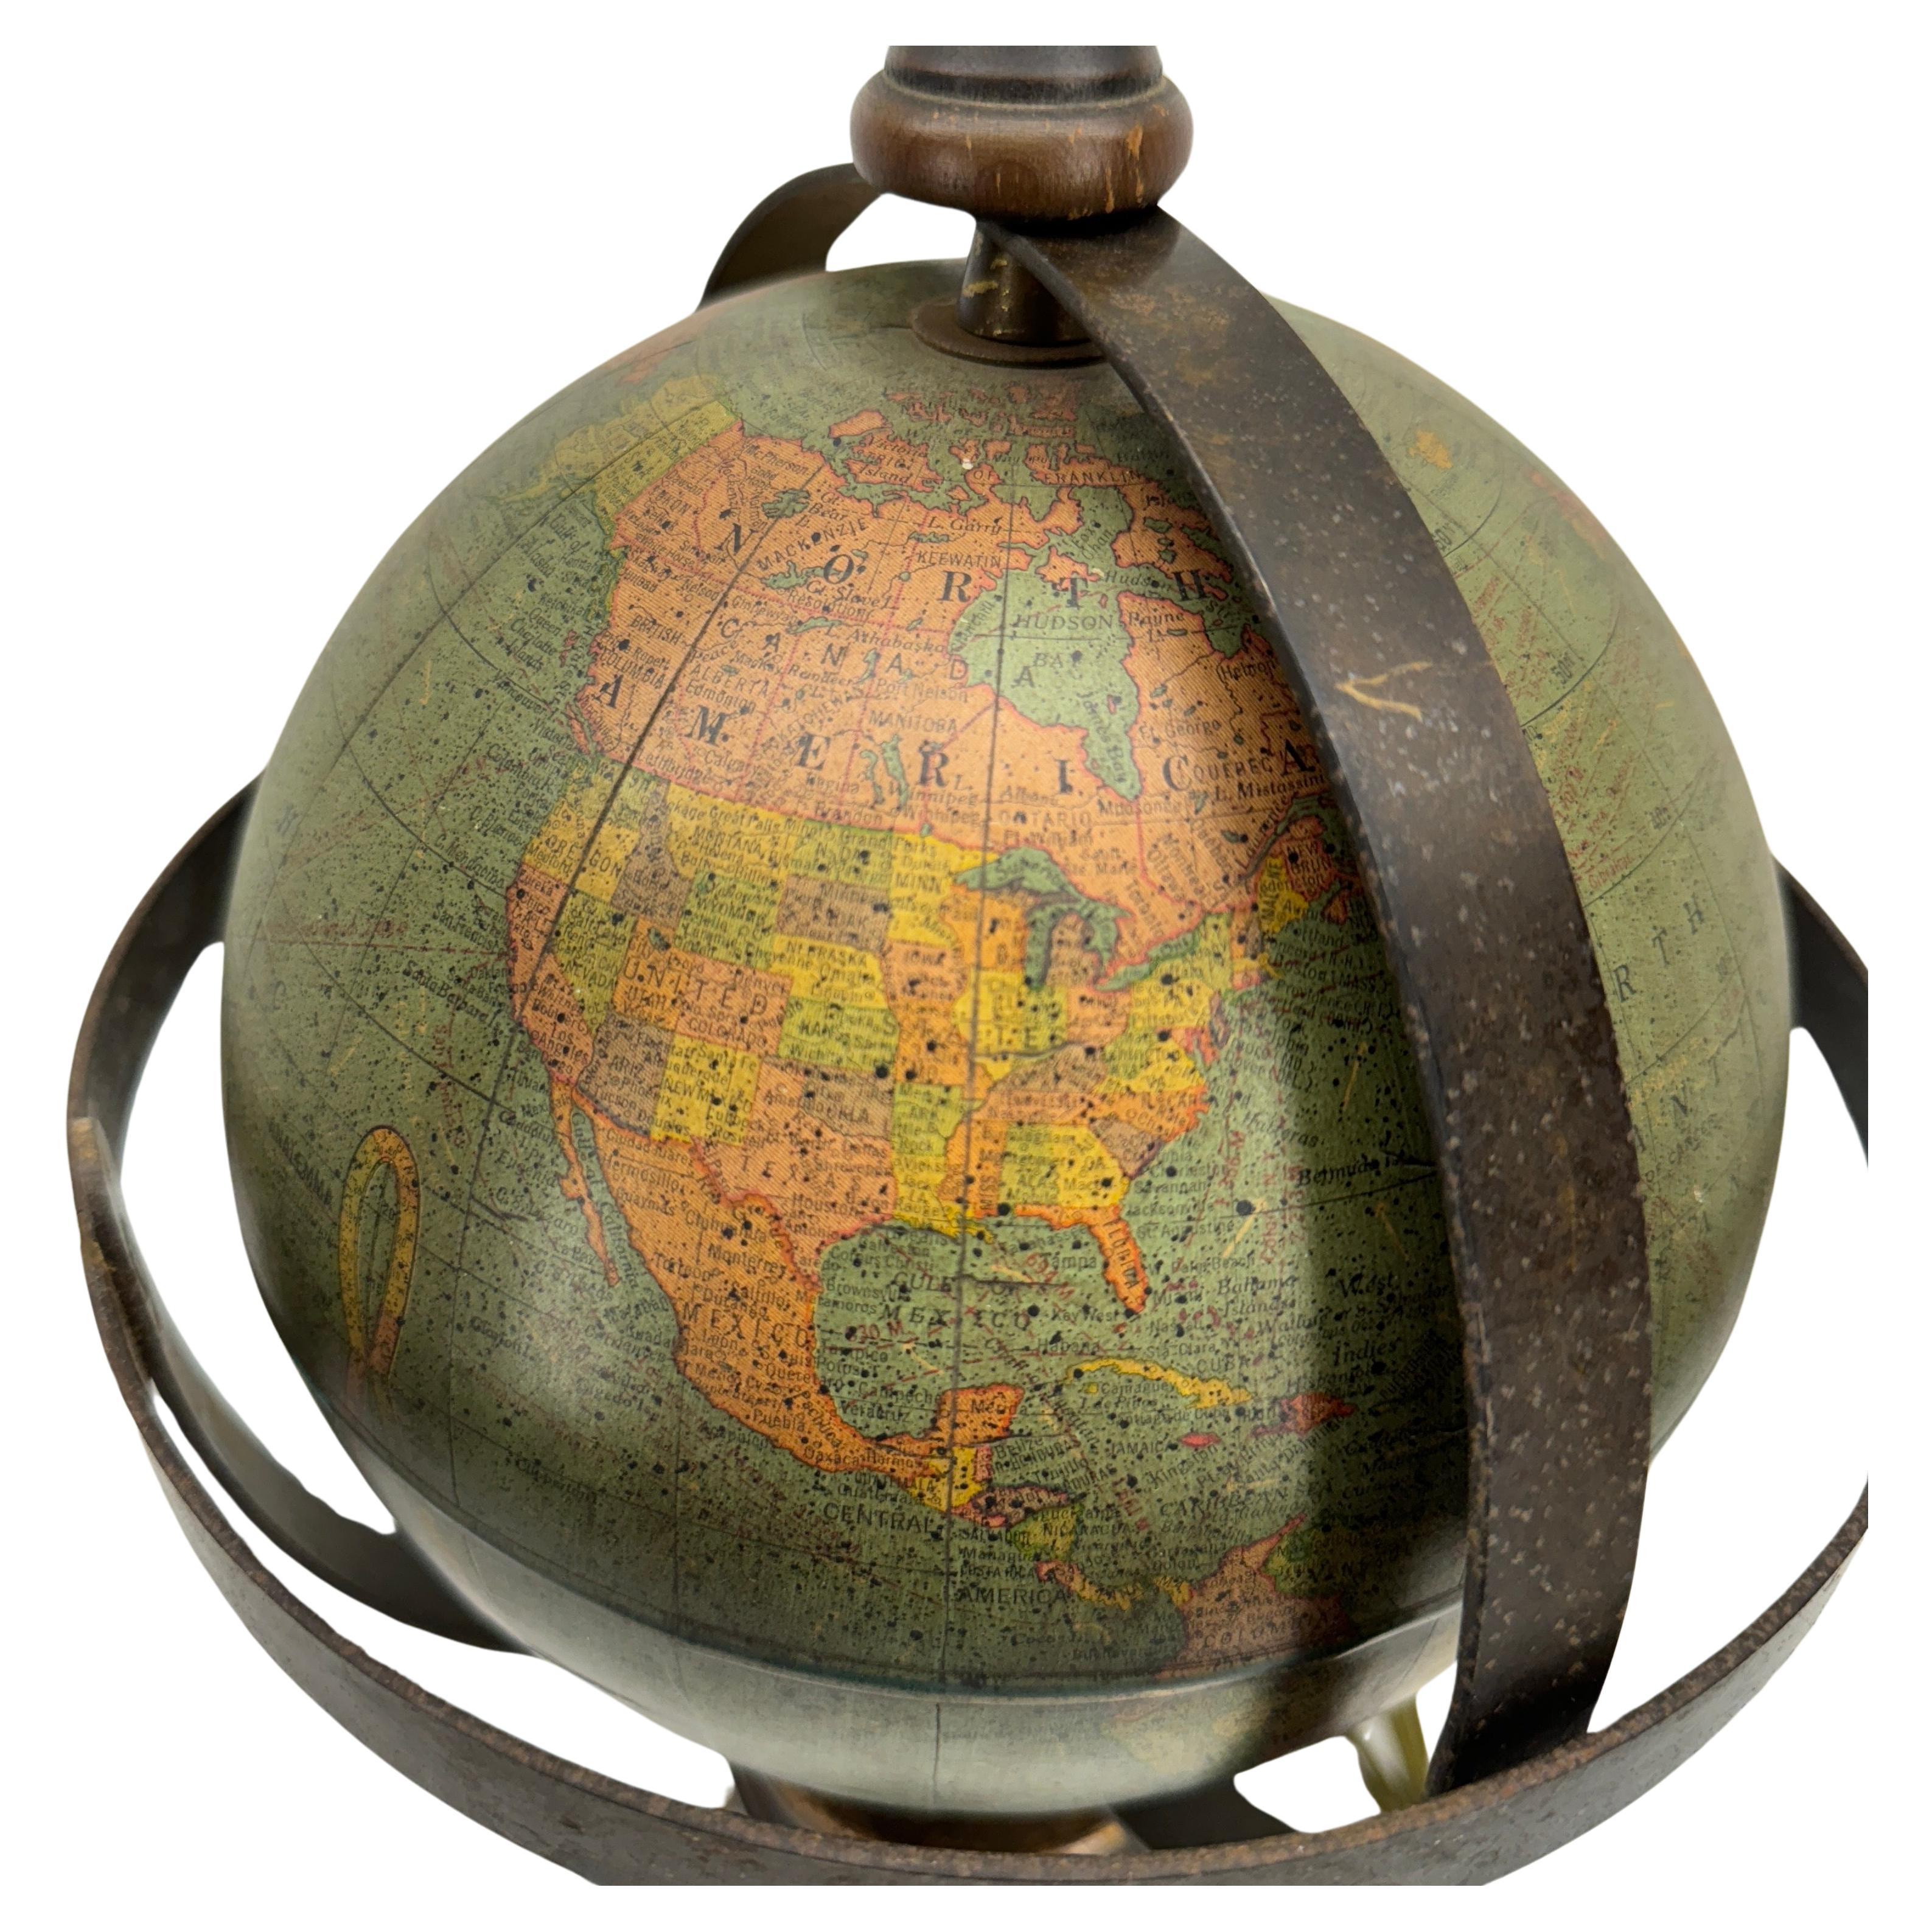 Old World Globe Table Lamp, 1950's

Impressive 8 inch Terrestrial Globe made by George F Cram Company Indianapolis, Indiana. This classic Mid-Century Modern lamp would be a wonderful addition to any library, study or bedroom setting. 
The base